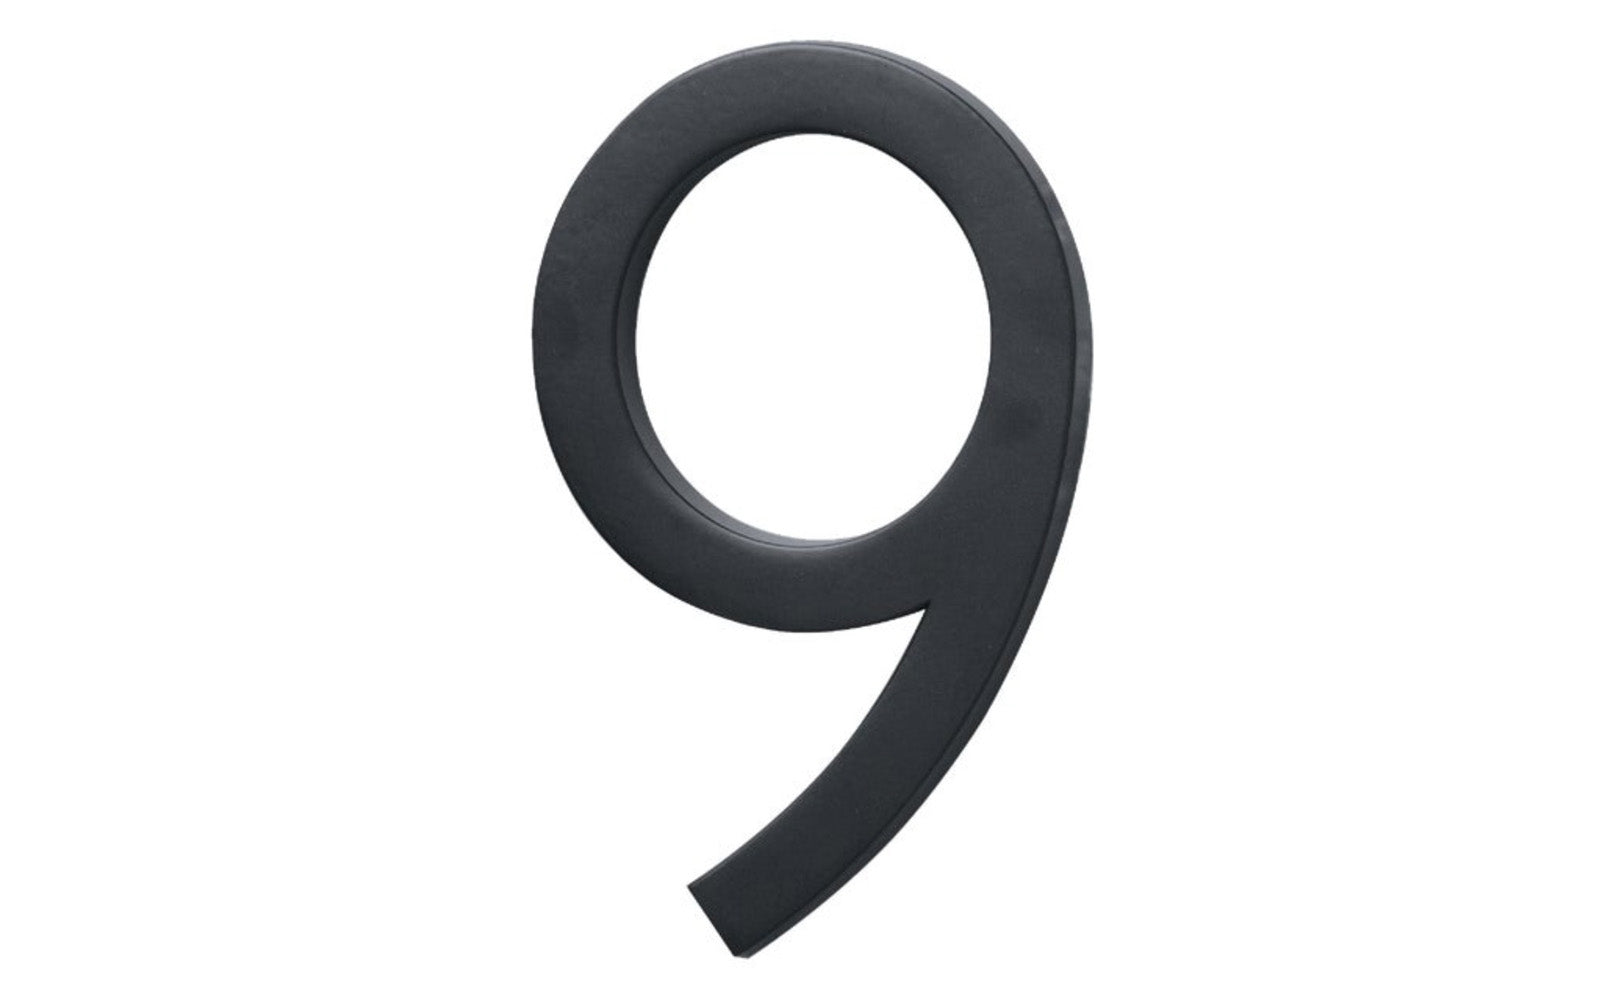 Number Nine House Number in a classy architectural style design. Satin black finish. 6" size house number with 1/2" material thickness. Can be installed flush mount or floating mount (elevated from wall for a shadow effect). #9 House Number. Hy-Ko Model No. FM-6/9. 029069310790